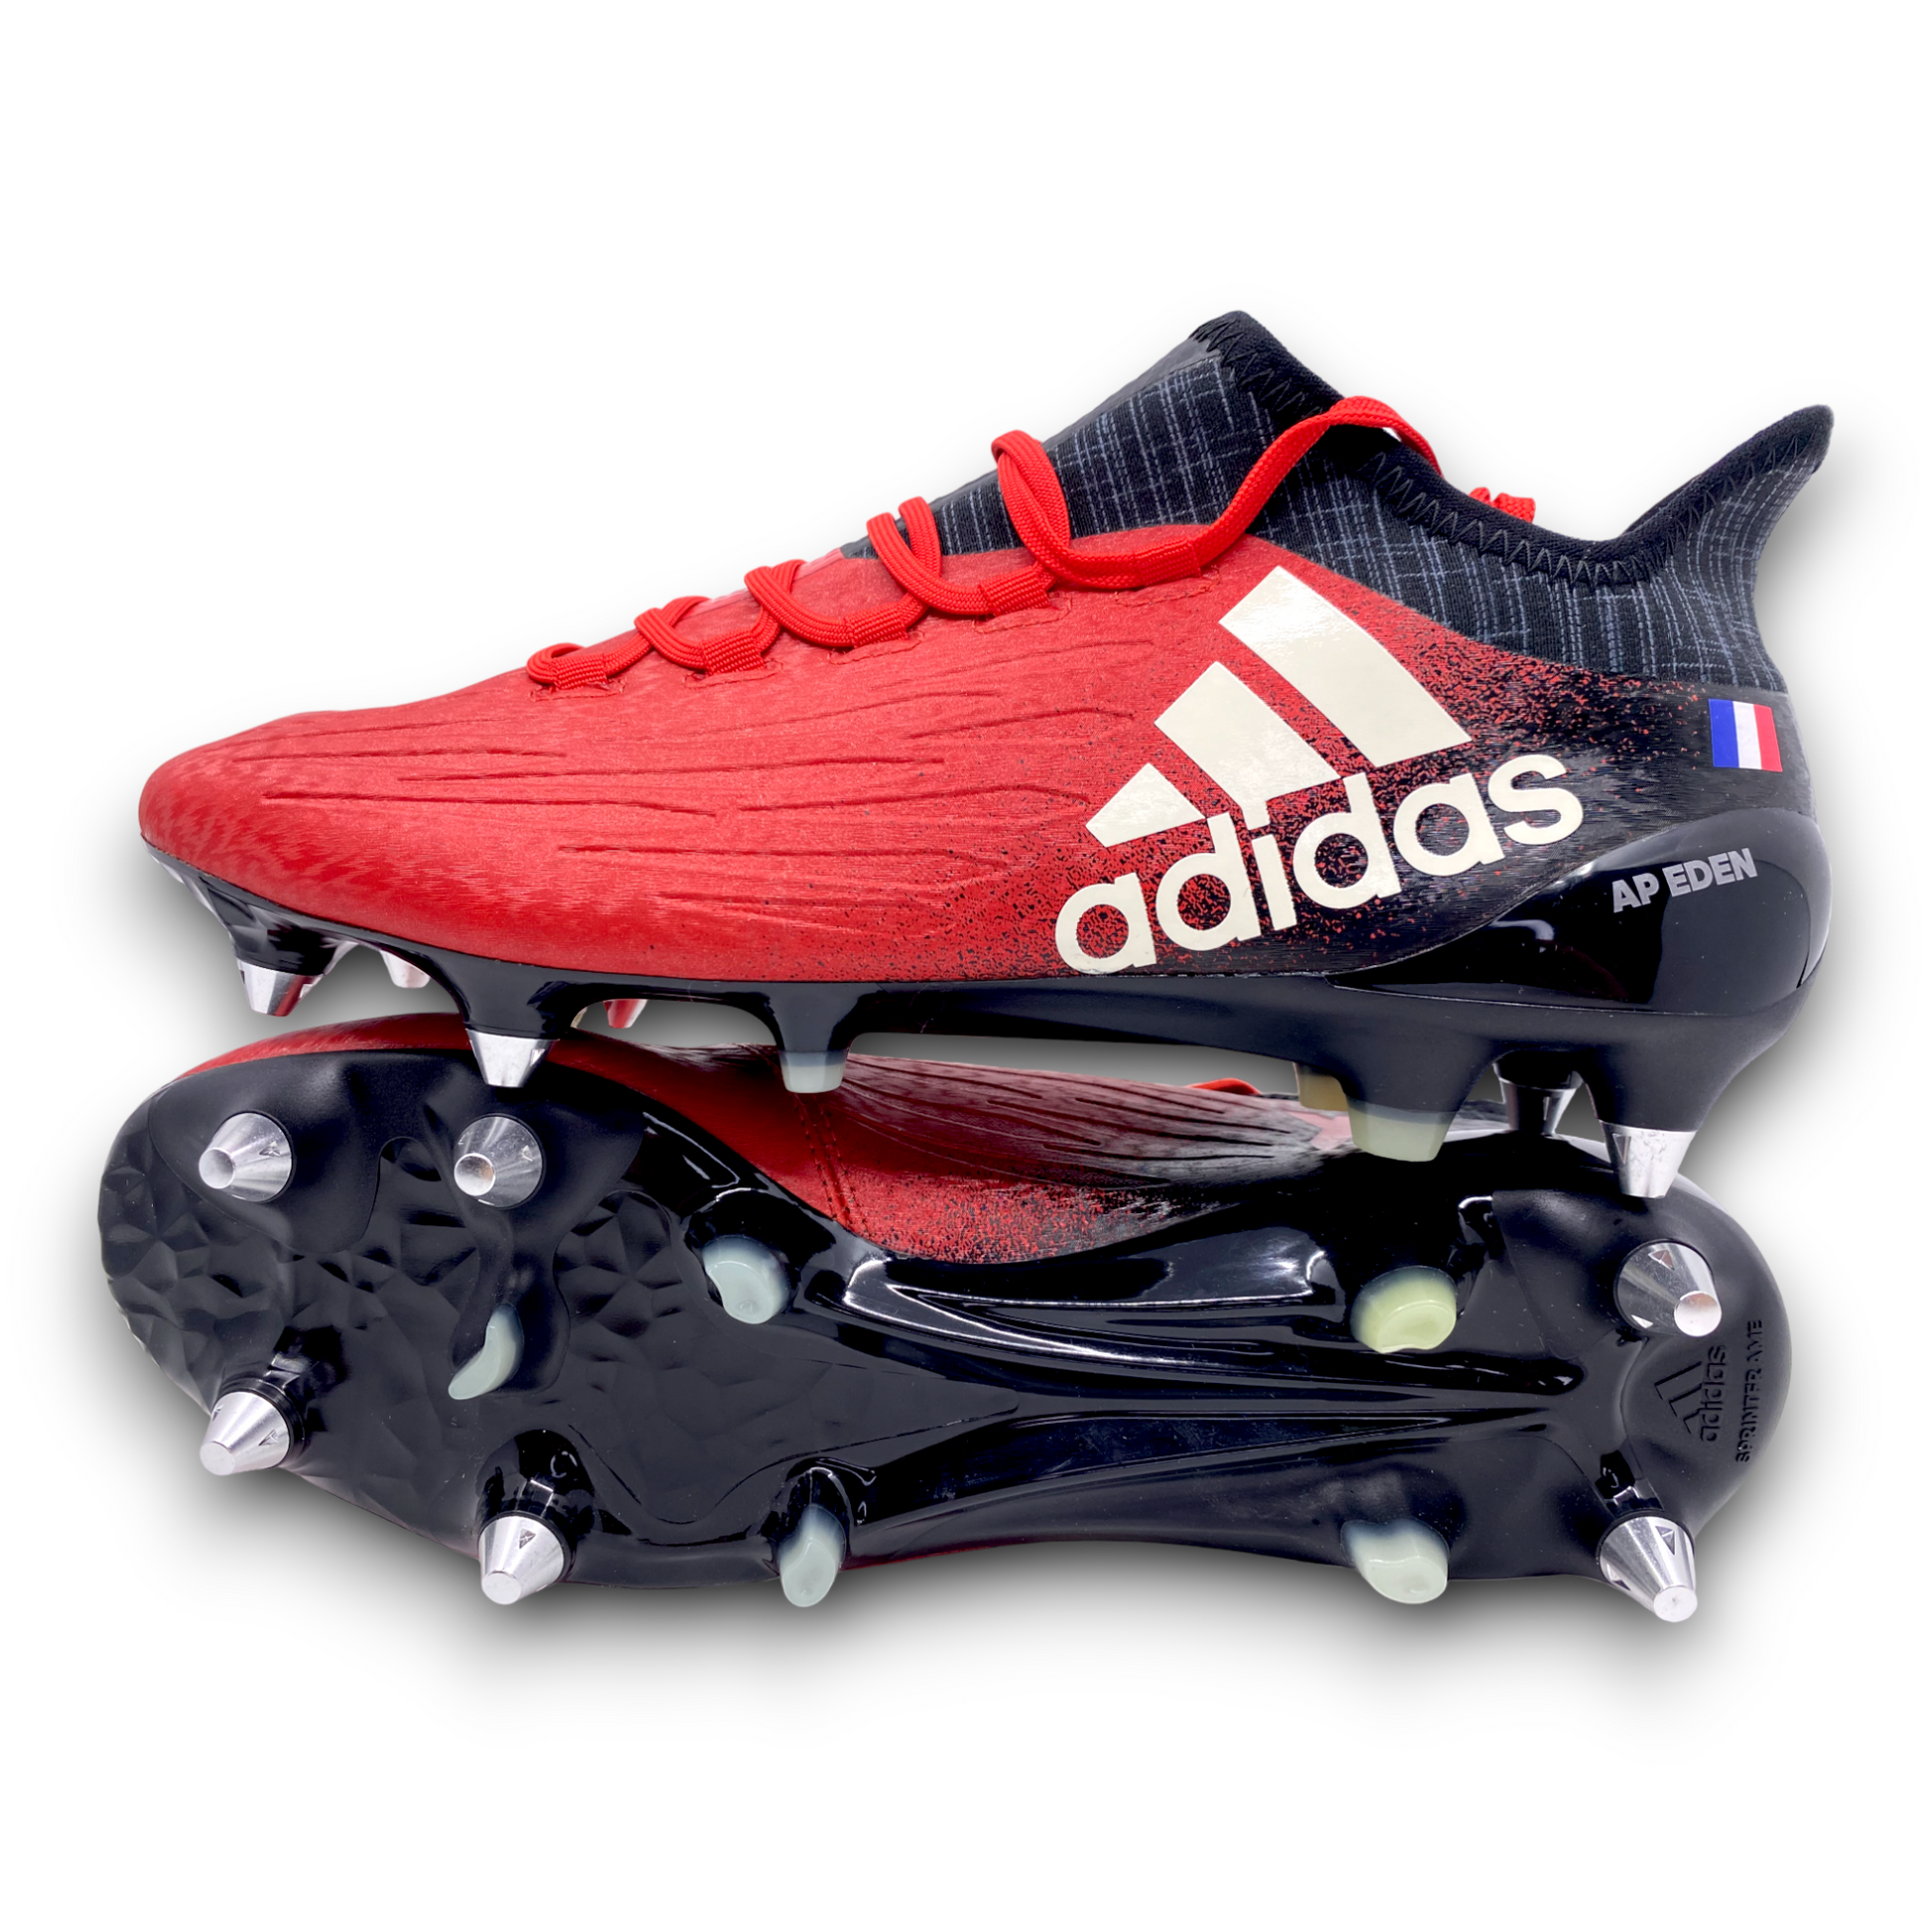 Adidas X 16.1 SG "Pack Red Limit" Athlete service Andre Pie – shoptcrampons